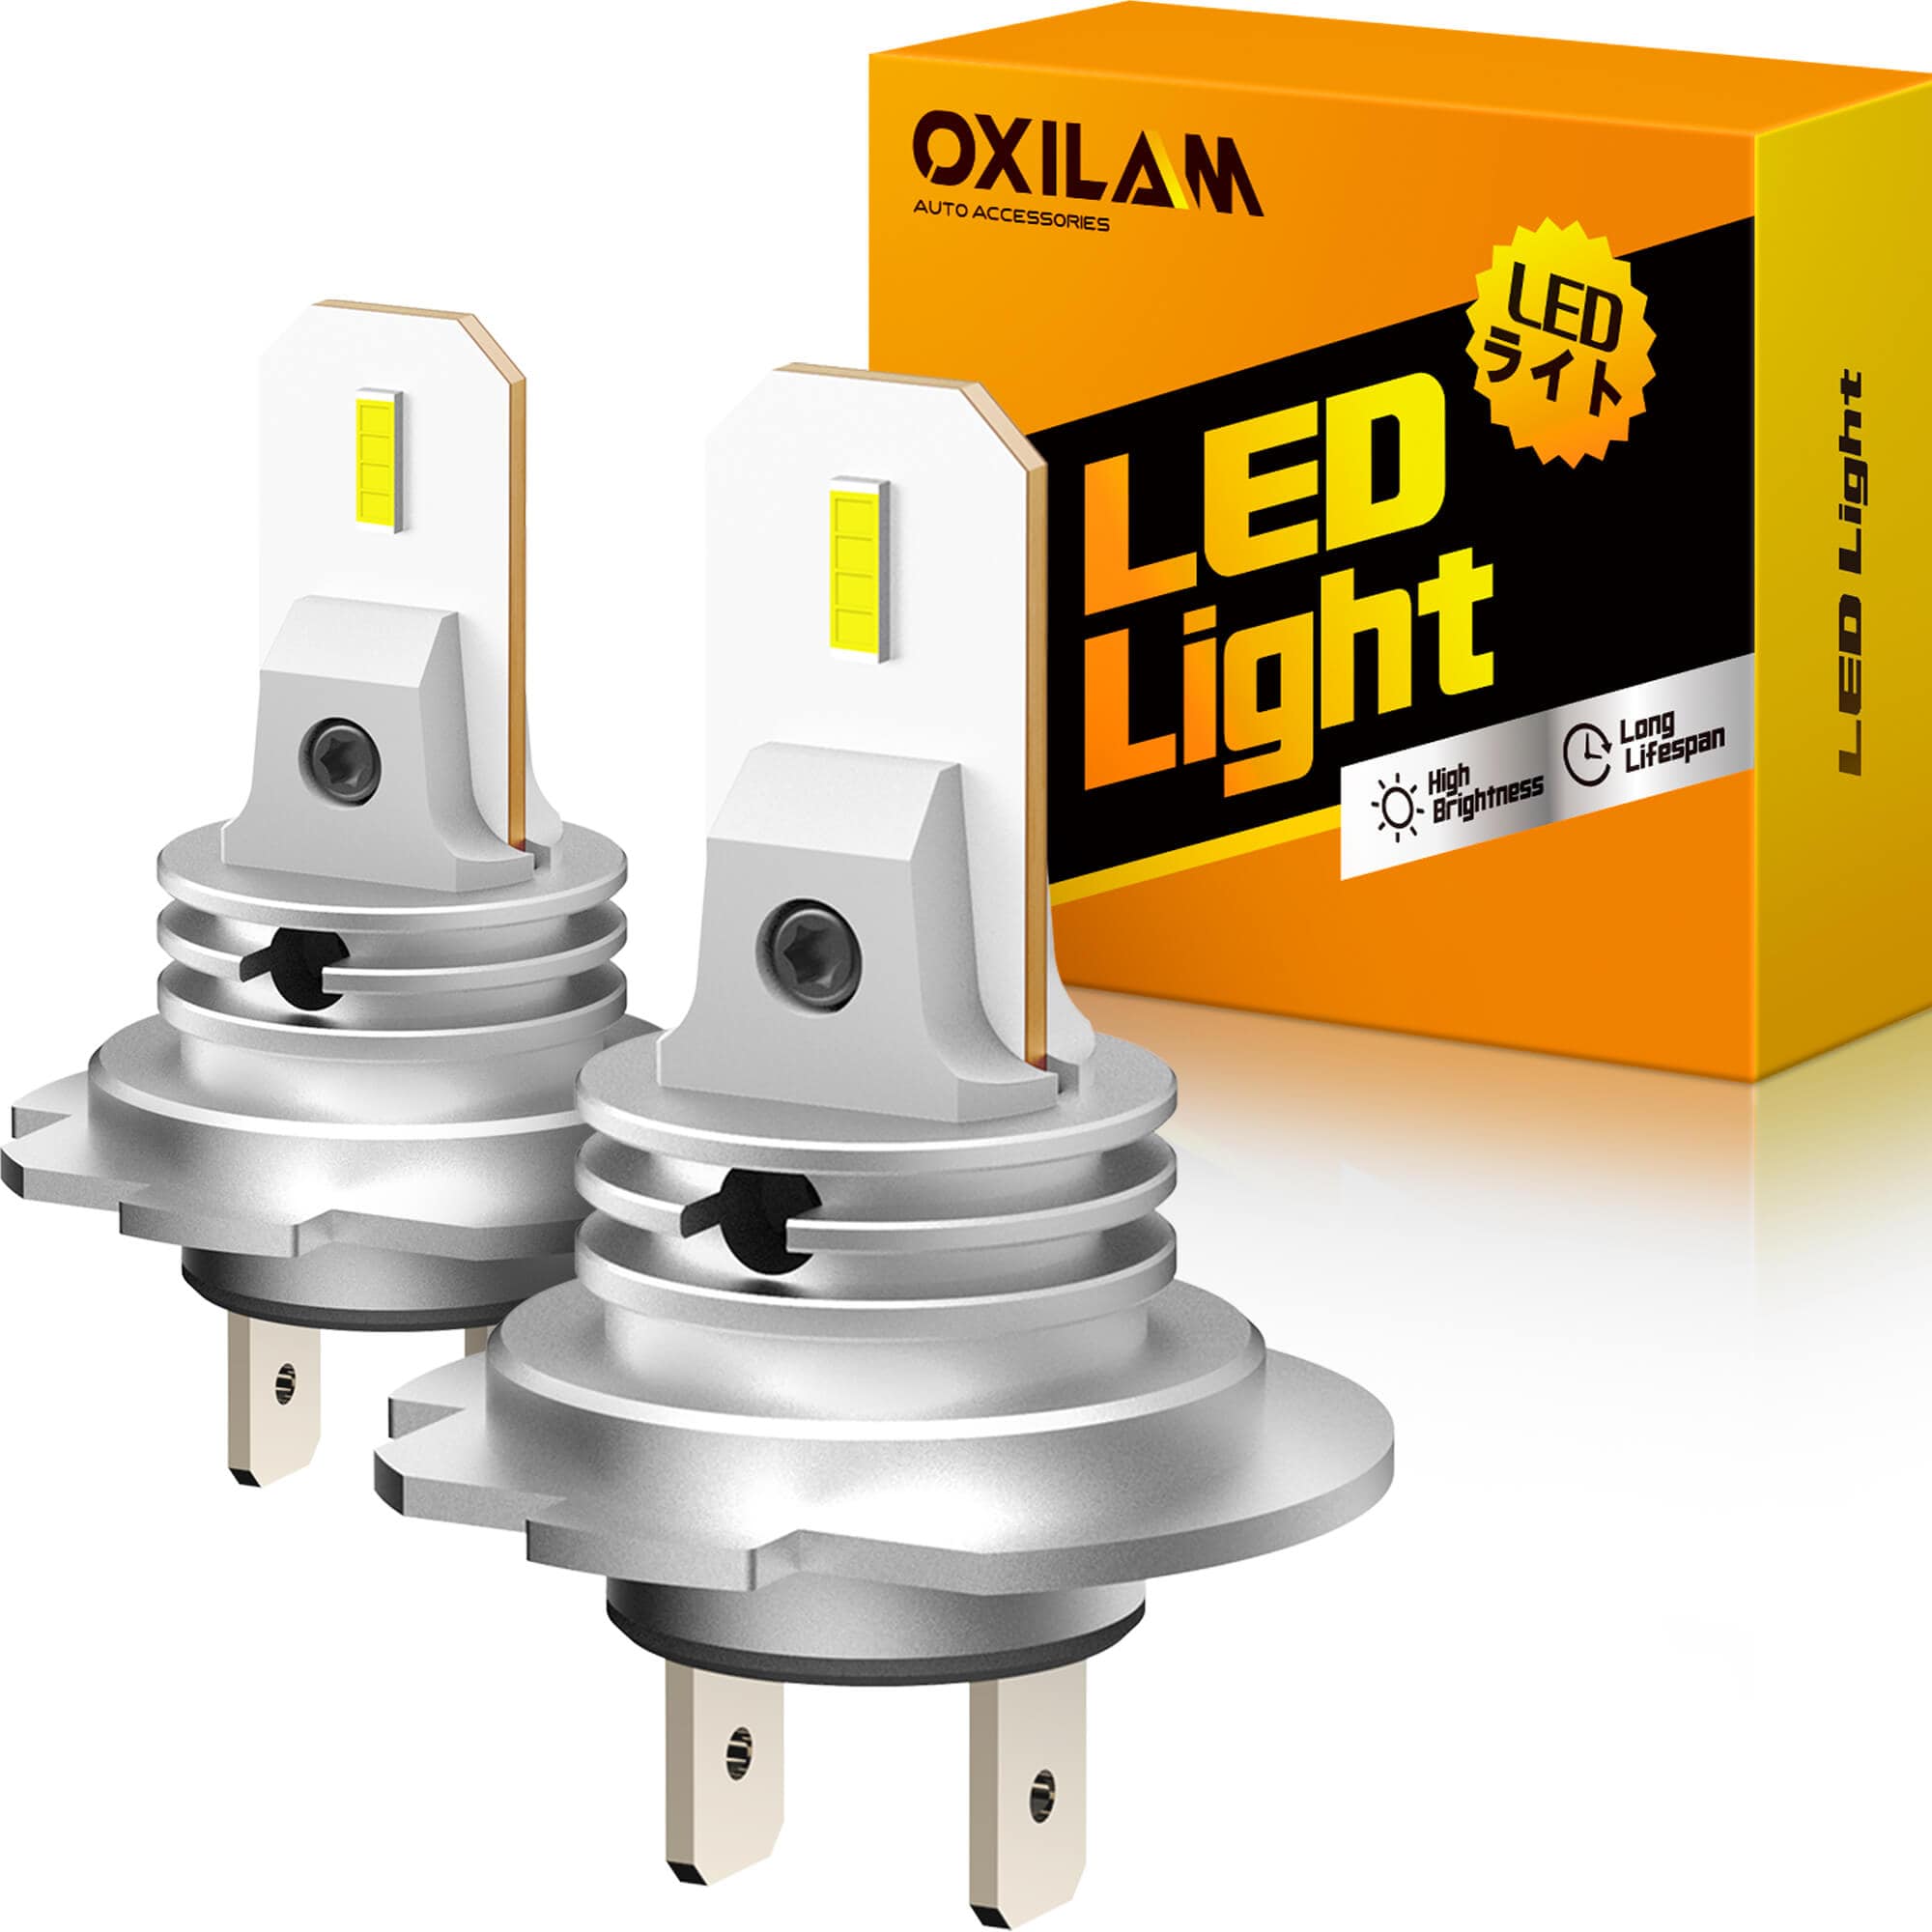 Oxilam Motor Vehicle Lighting OXILAM H7 LED Headlight Bulbs, CSP LED Chips 6500K Cool White, 1:1 Mini Size No Adapter Required